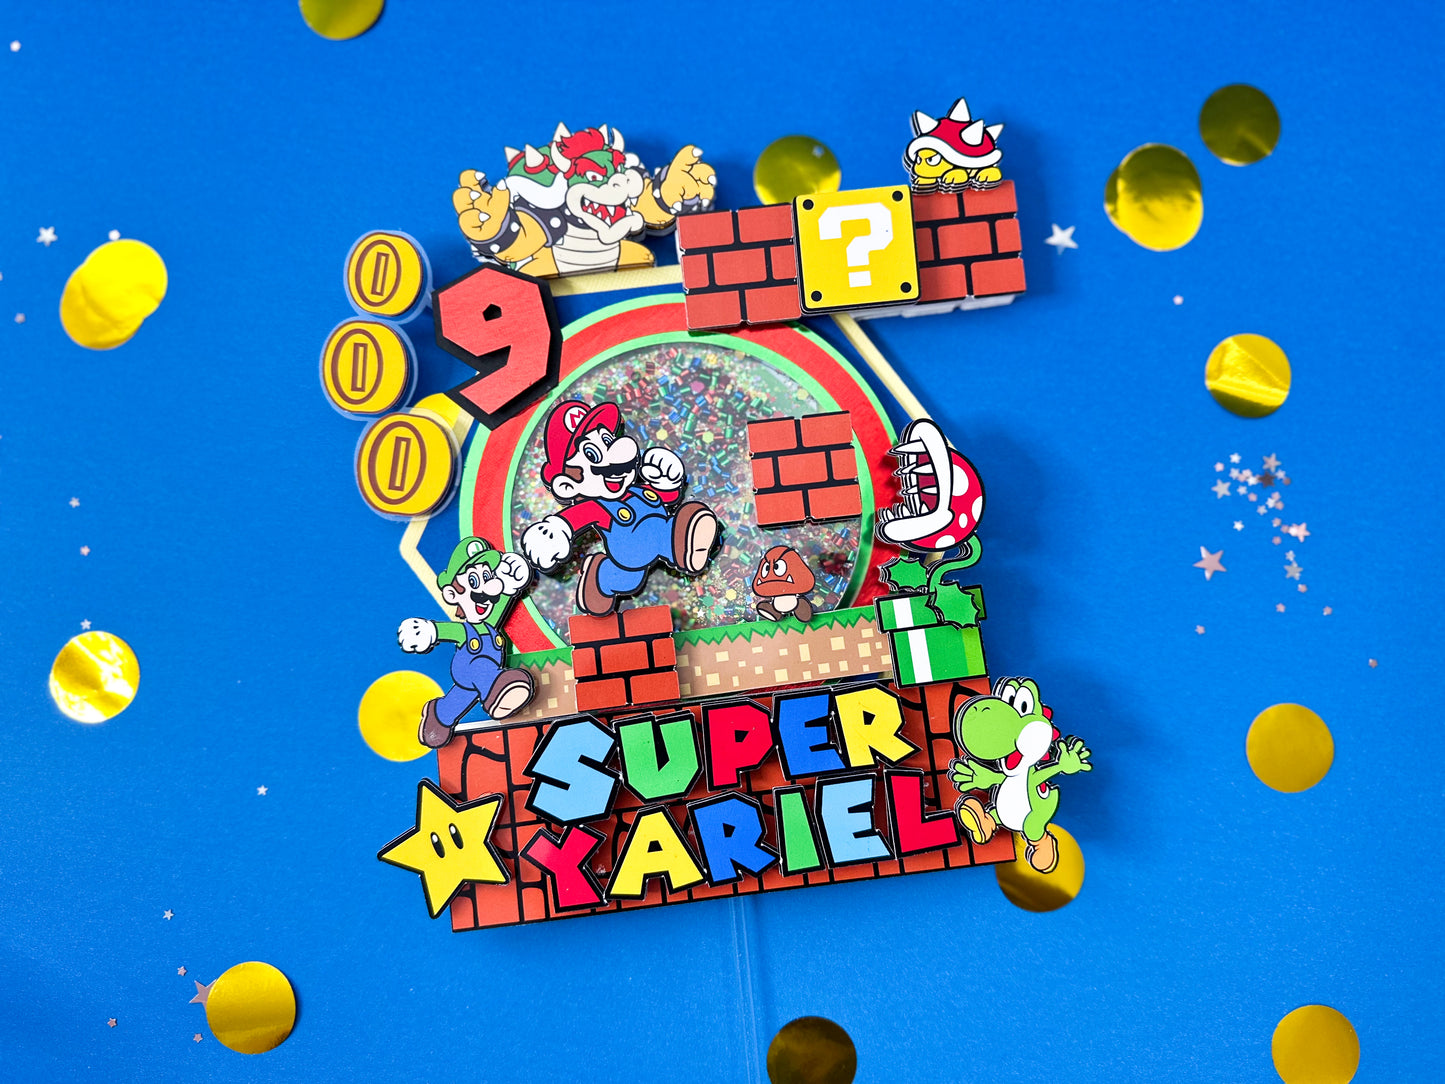 Plumber brothers Cake topper | game cake topper | bothers | plumbers bros